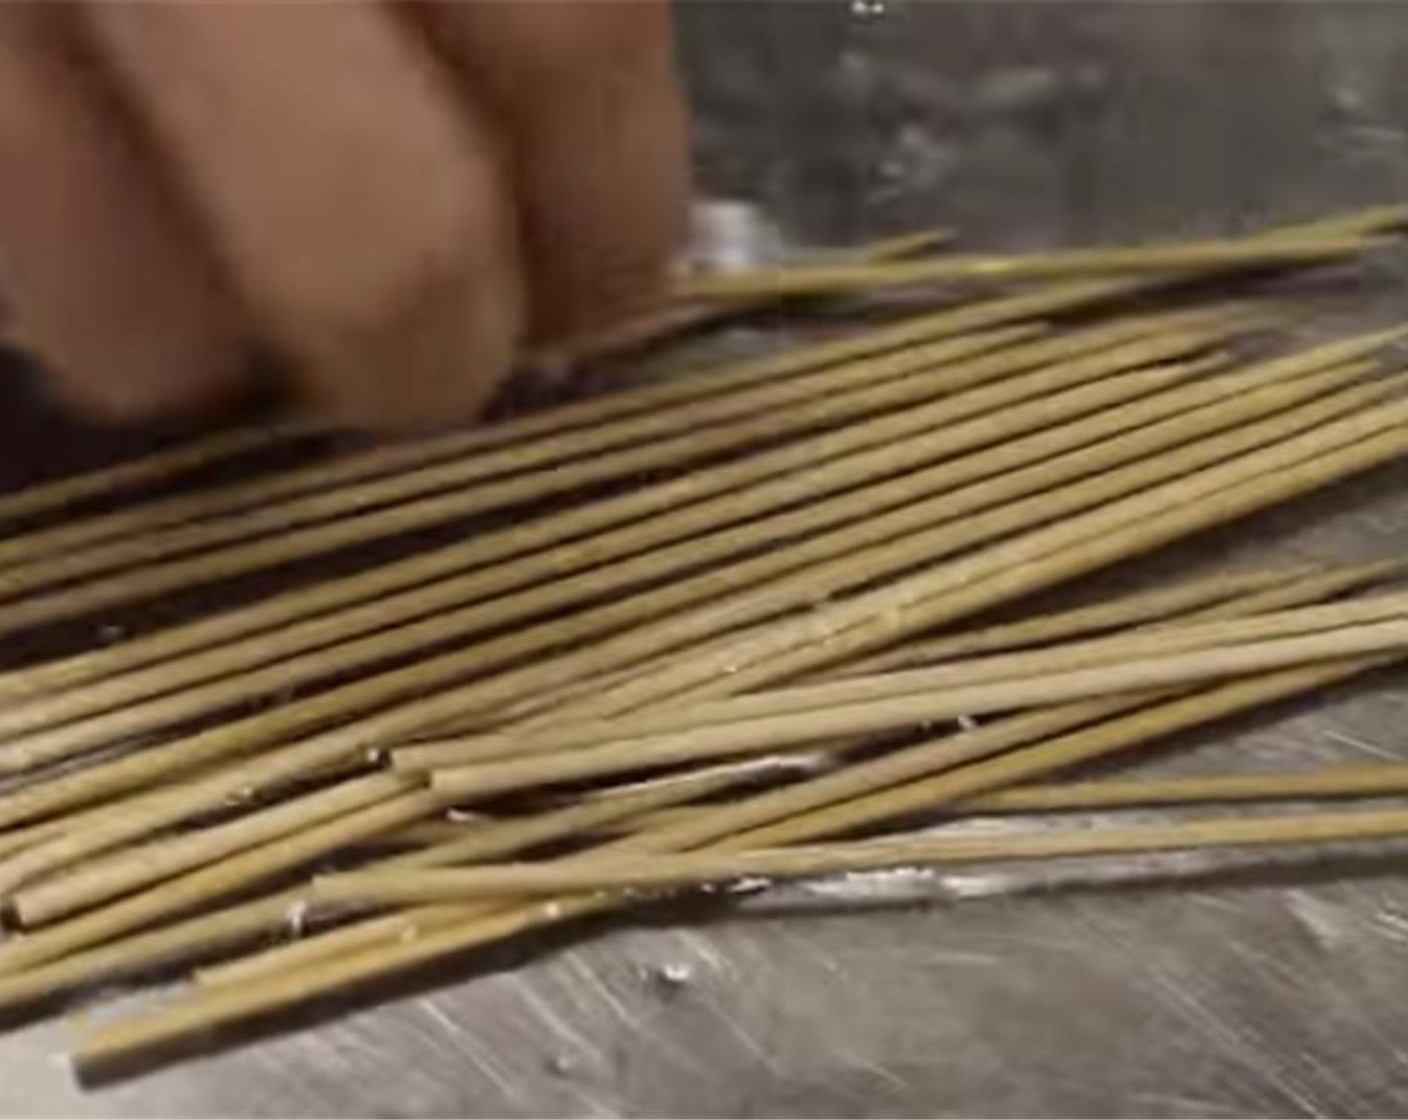 step 7 Soak the bamboo skewers in water for at least an hour to prevent them from burning while baking or frying.